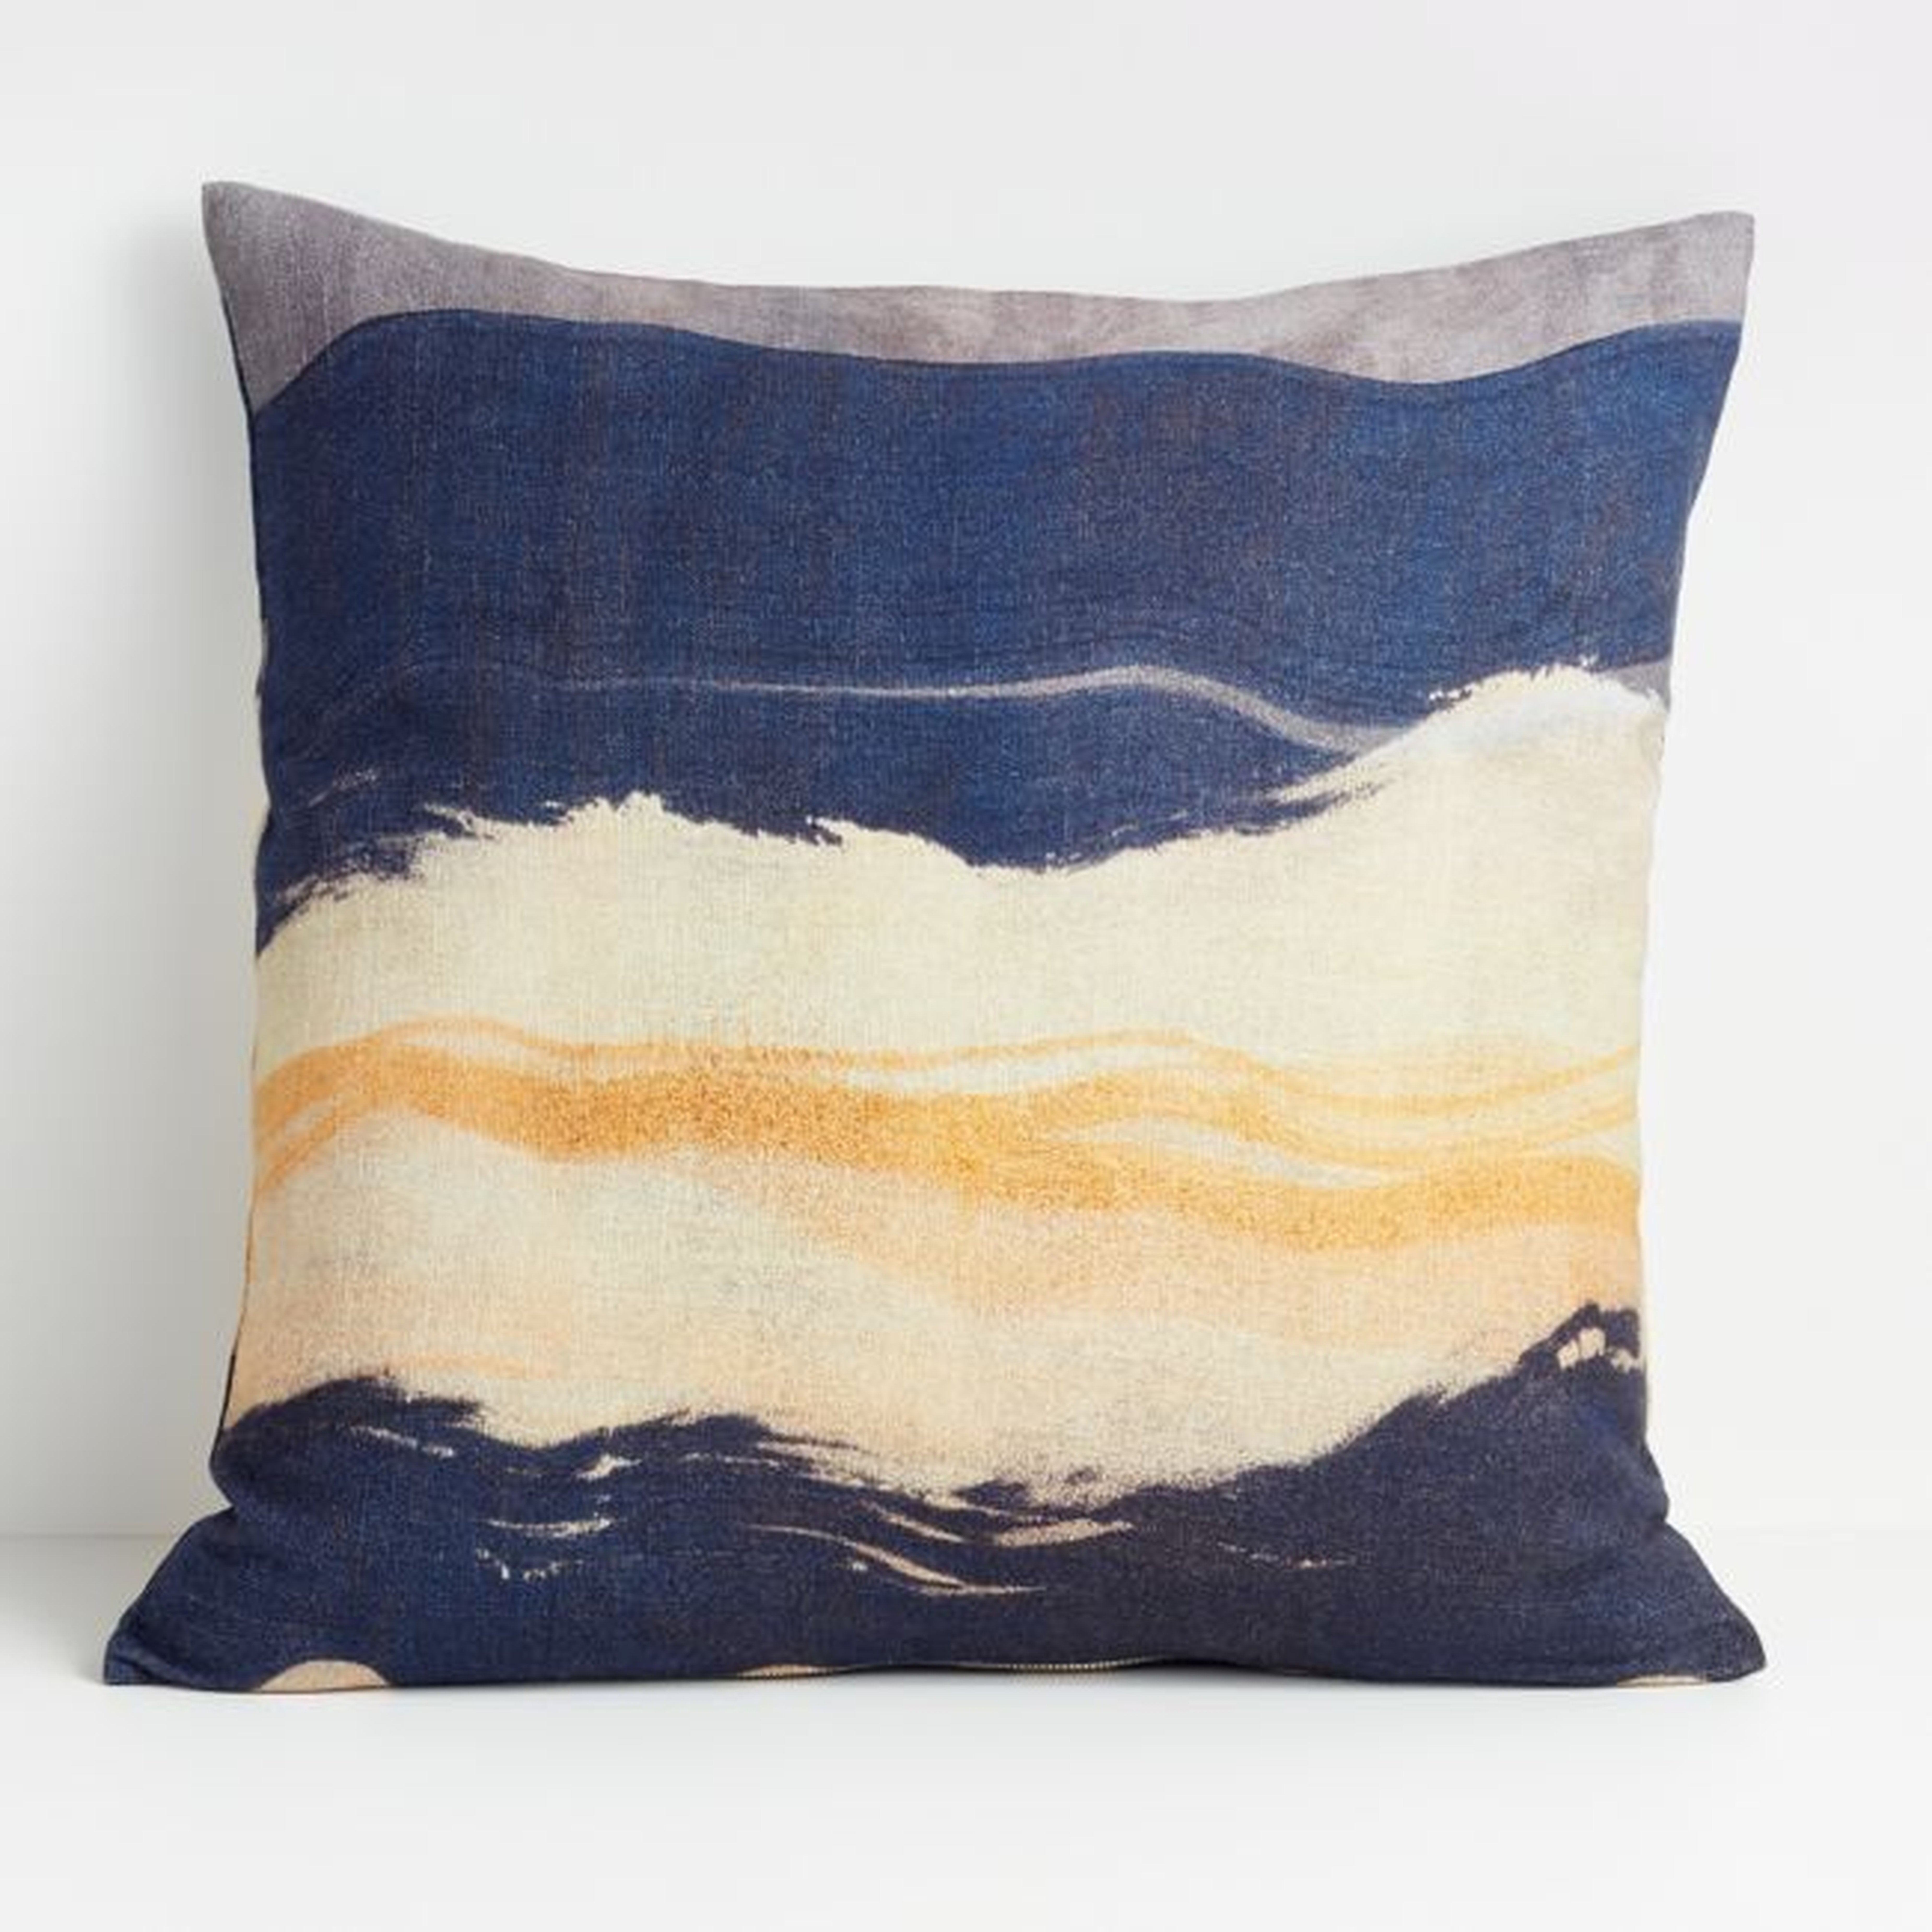 Paramo 23" Blue Watercolor Pillow with Feather-Down Insert - Crate and Barrel